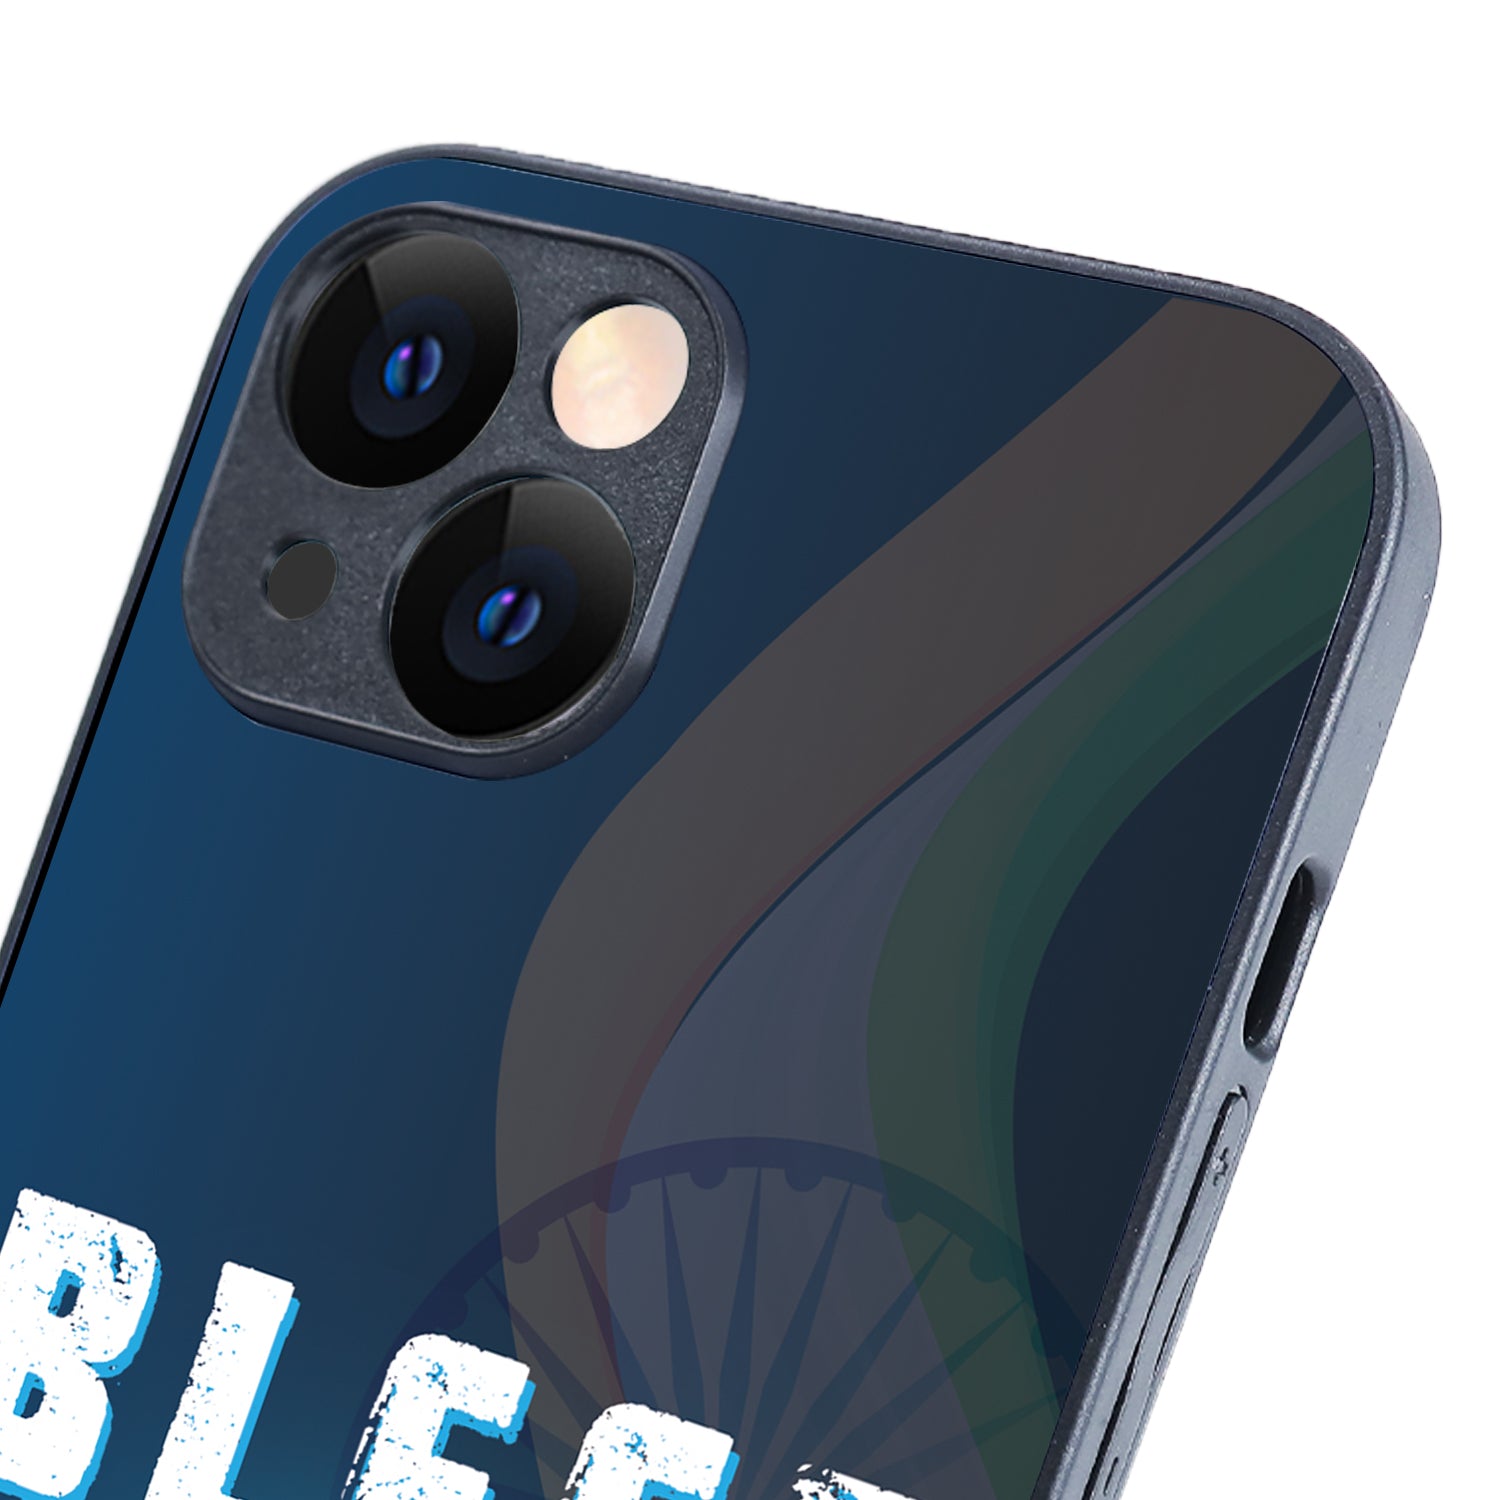 Bleed Blue Sports iPhone 14 Case